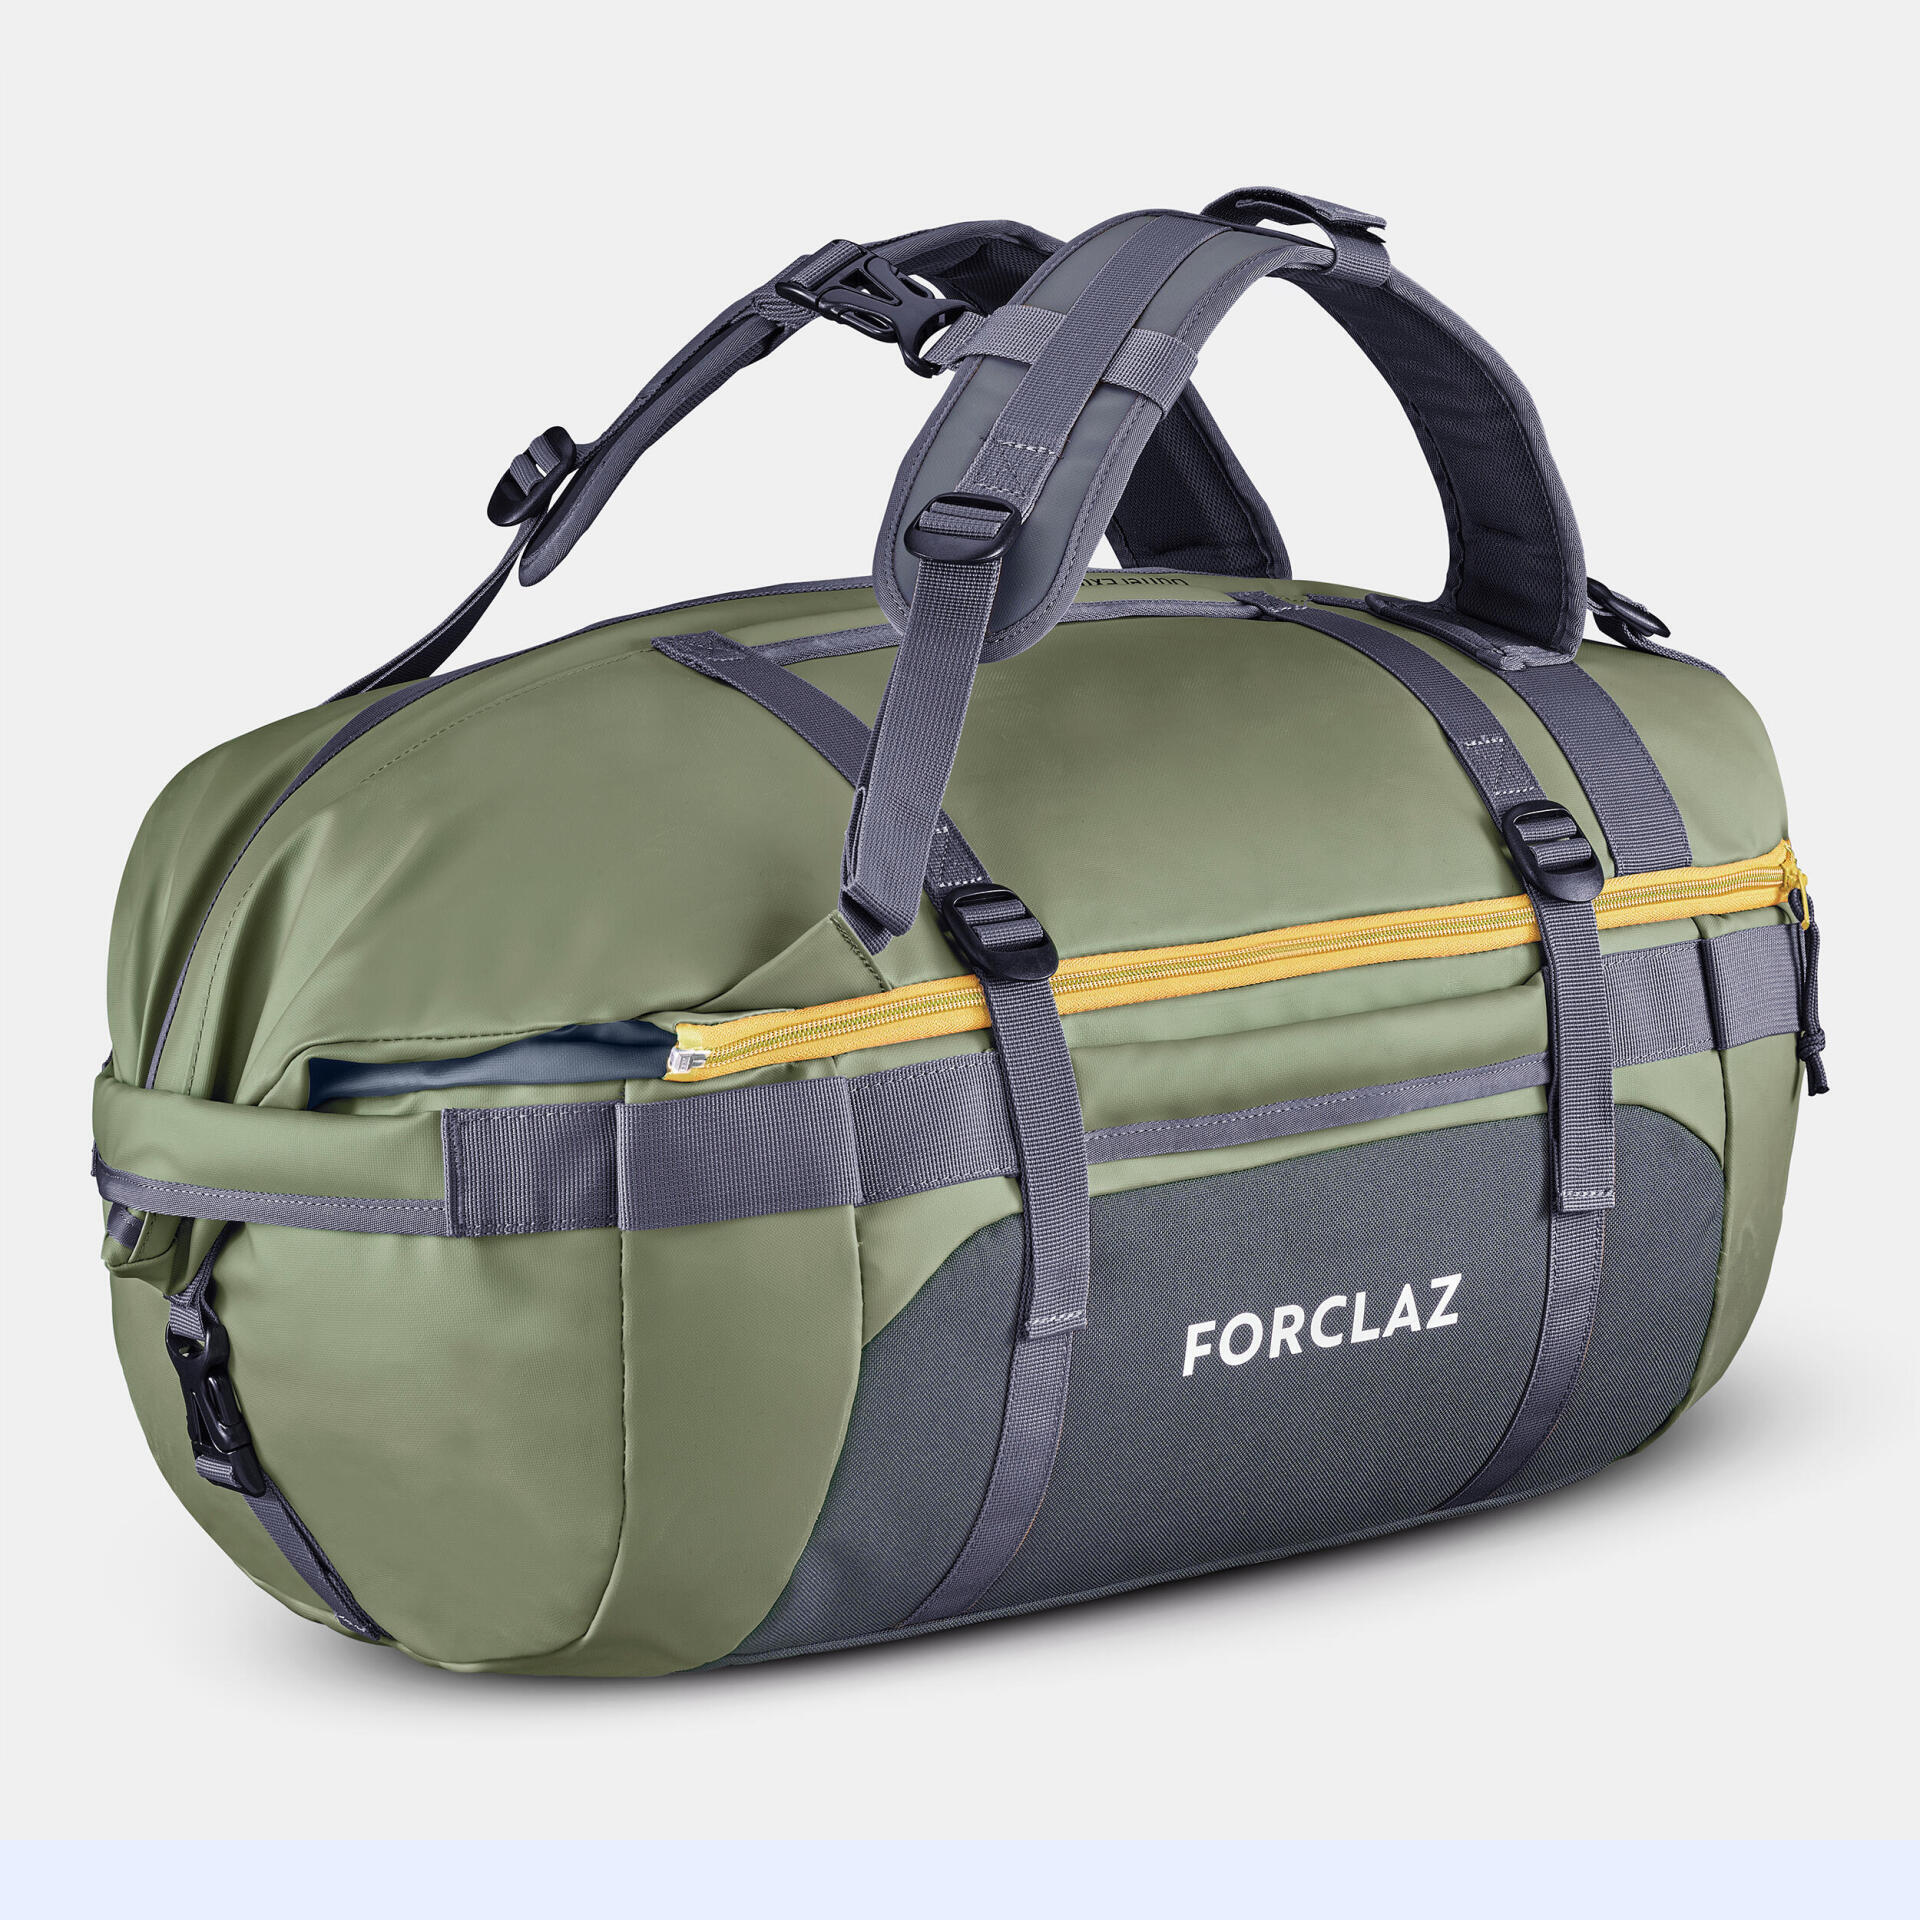 Choosing a practical and multi-use bag